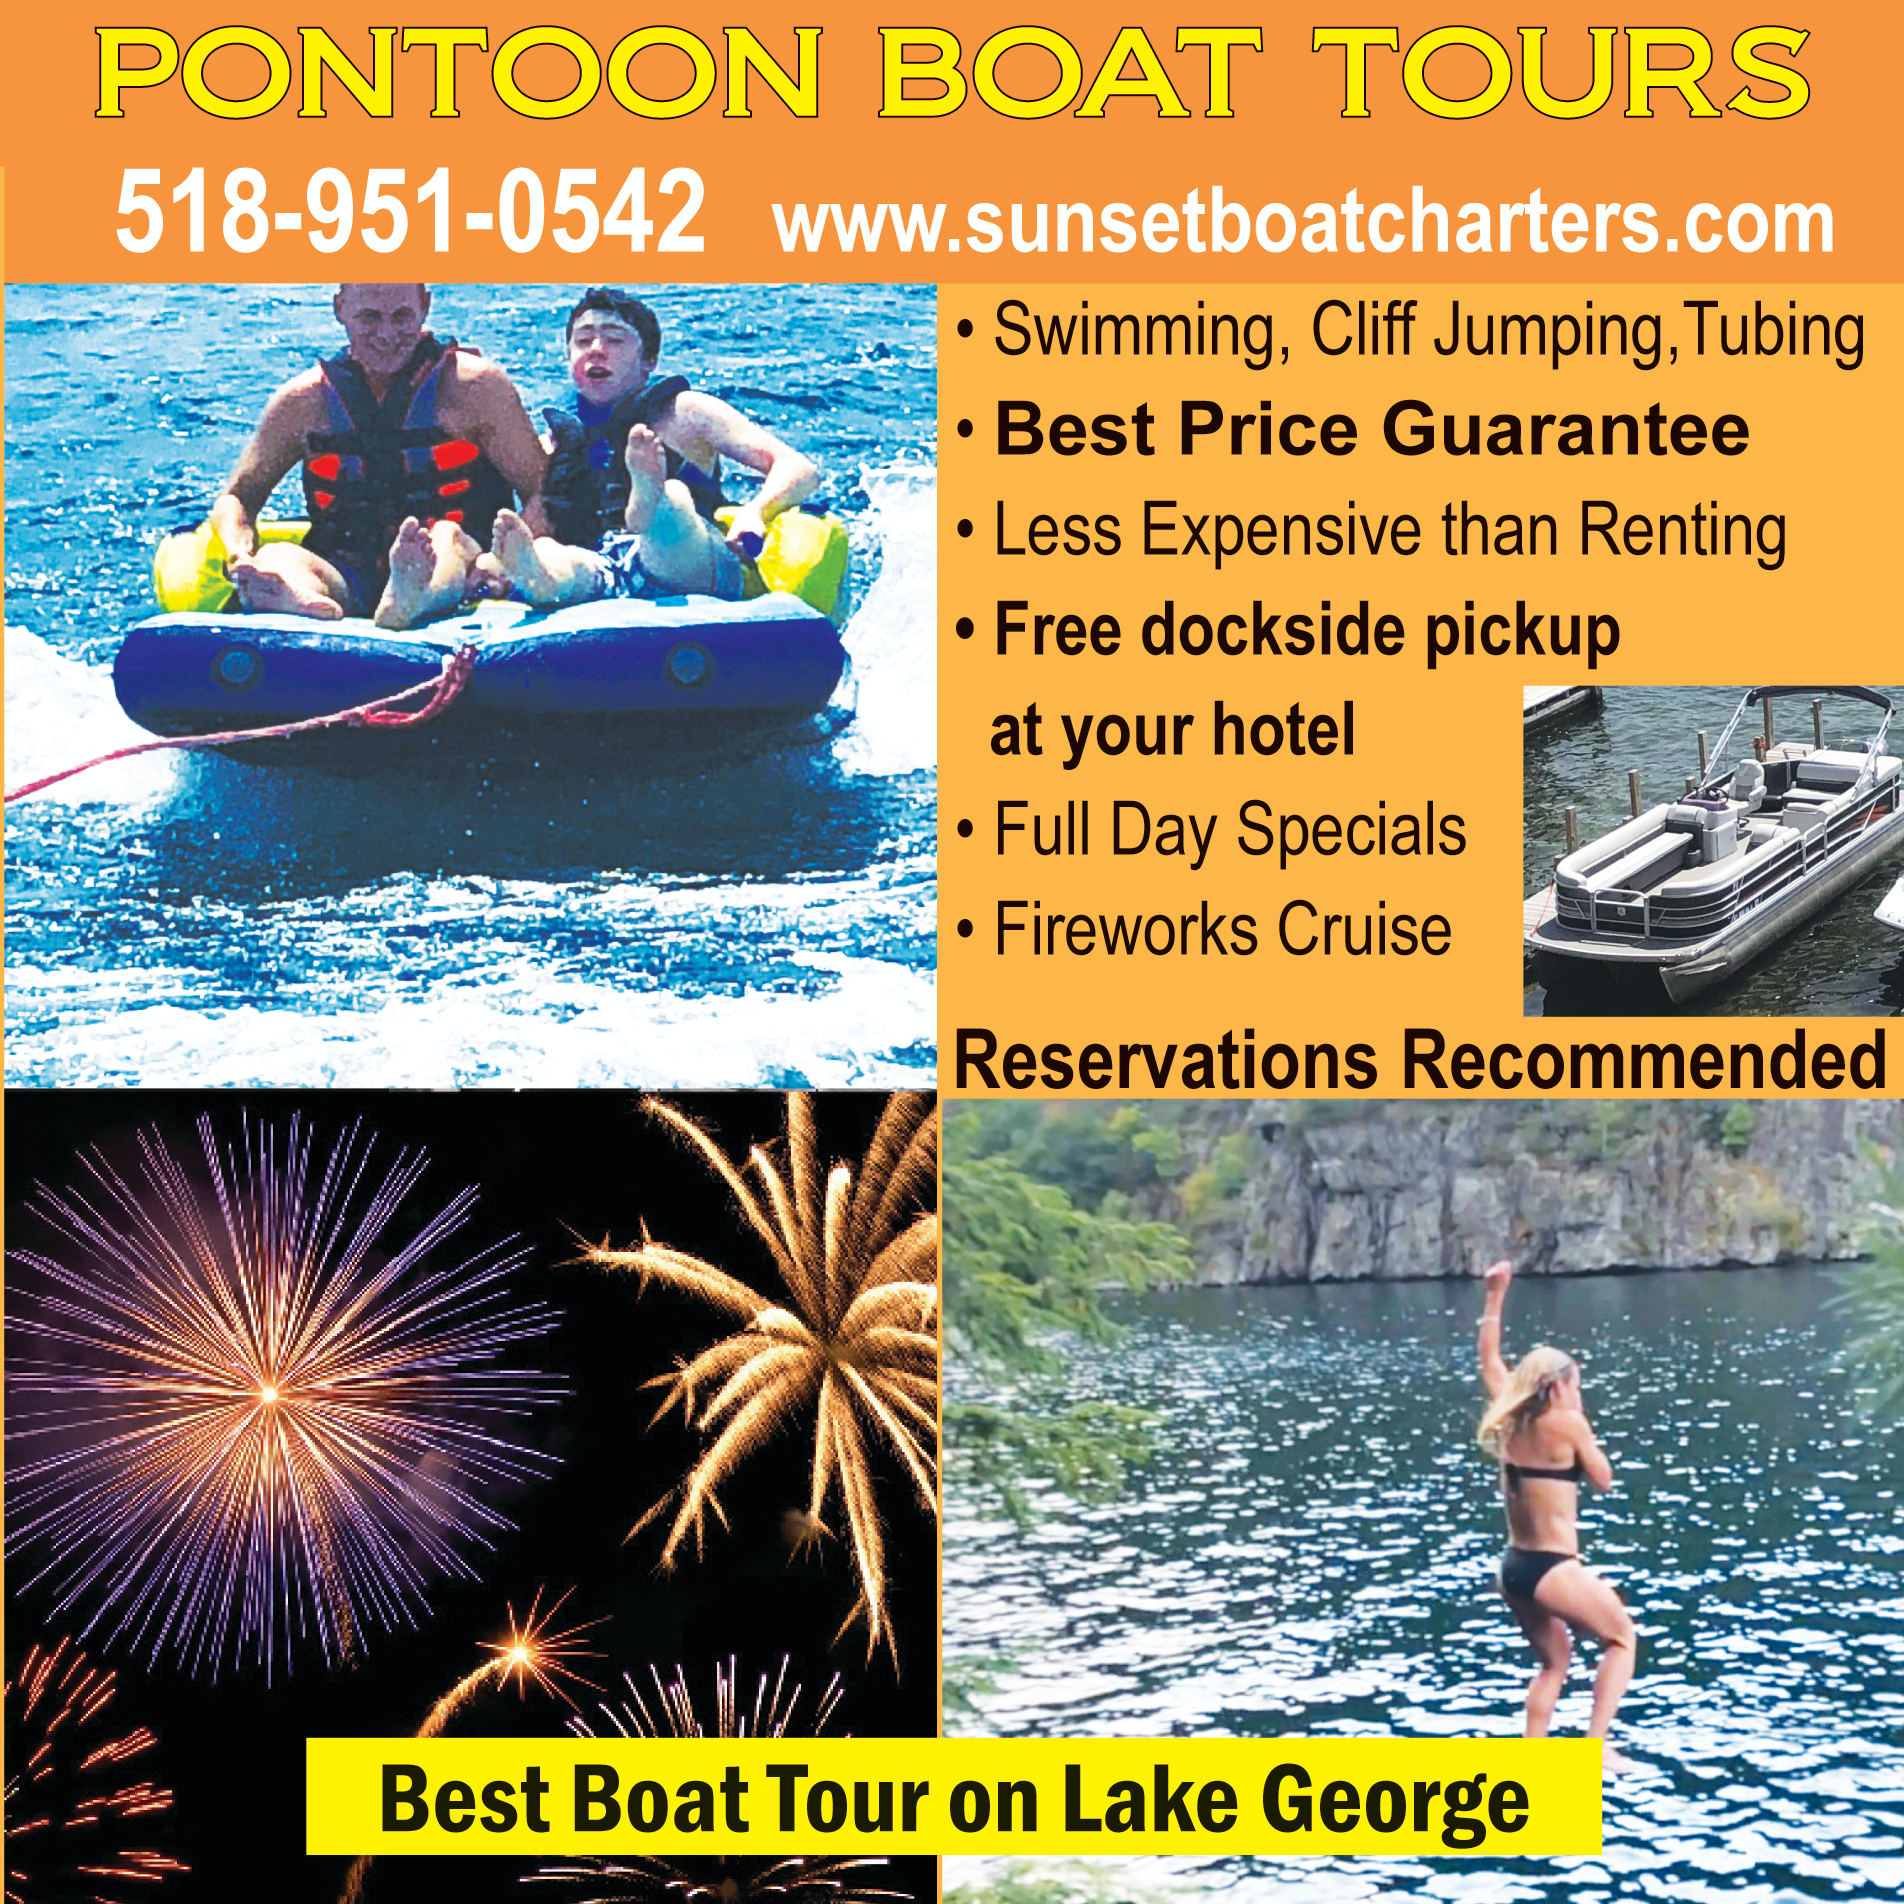 Sunset Boat Charters Print Ad